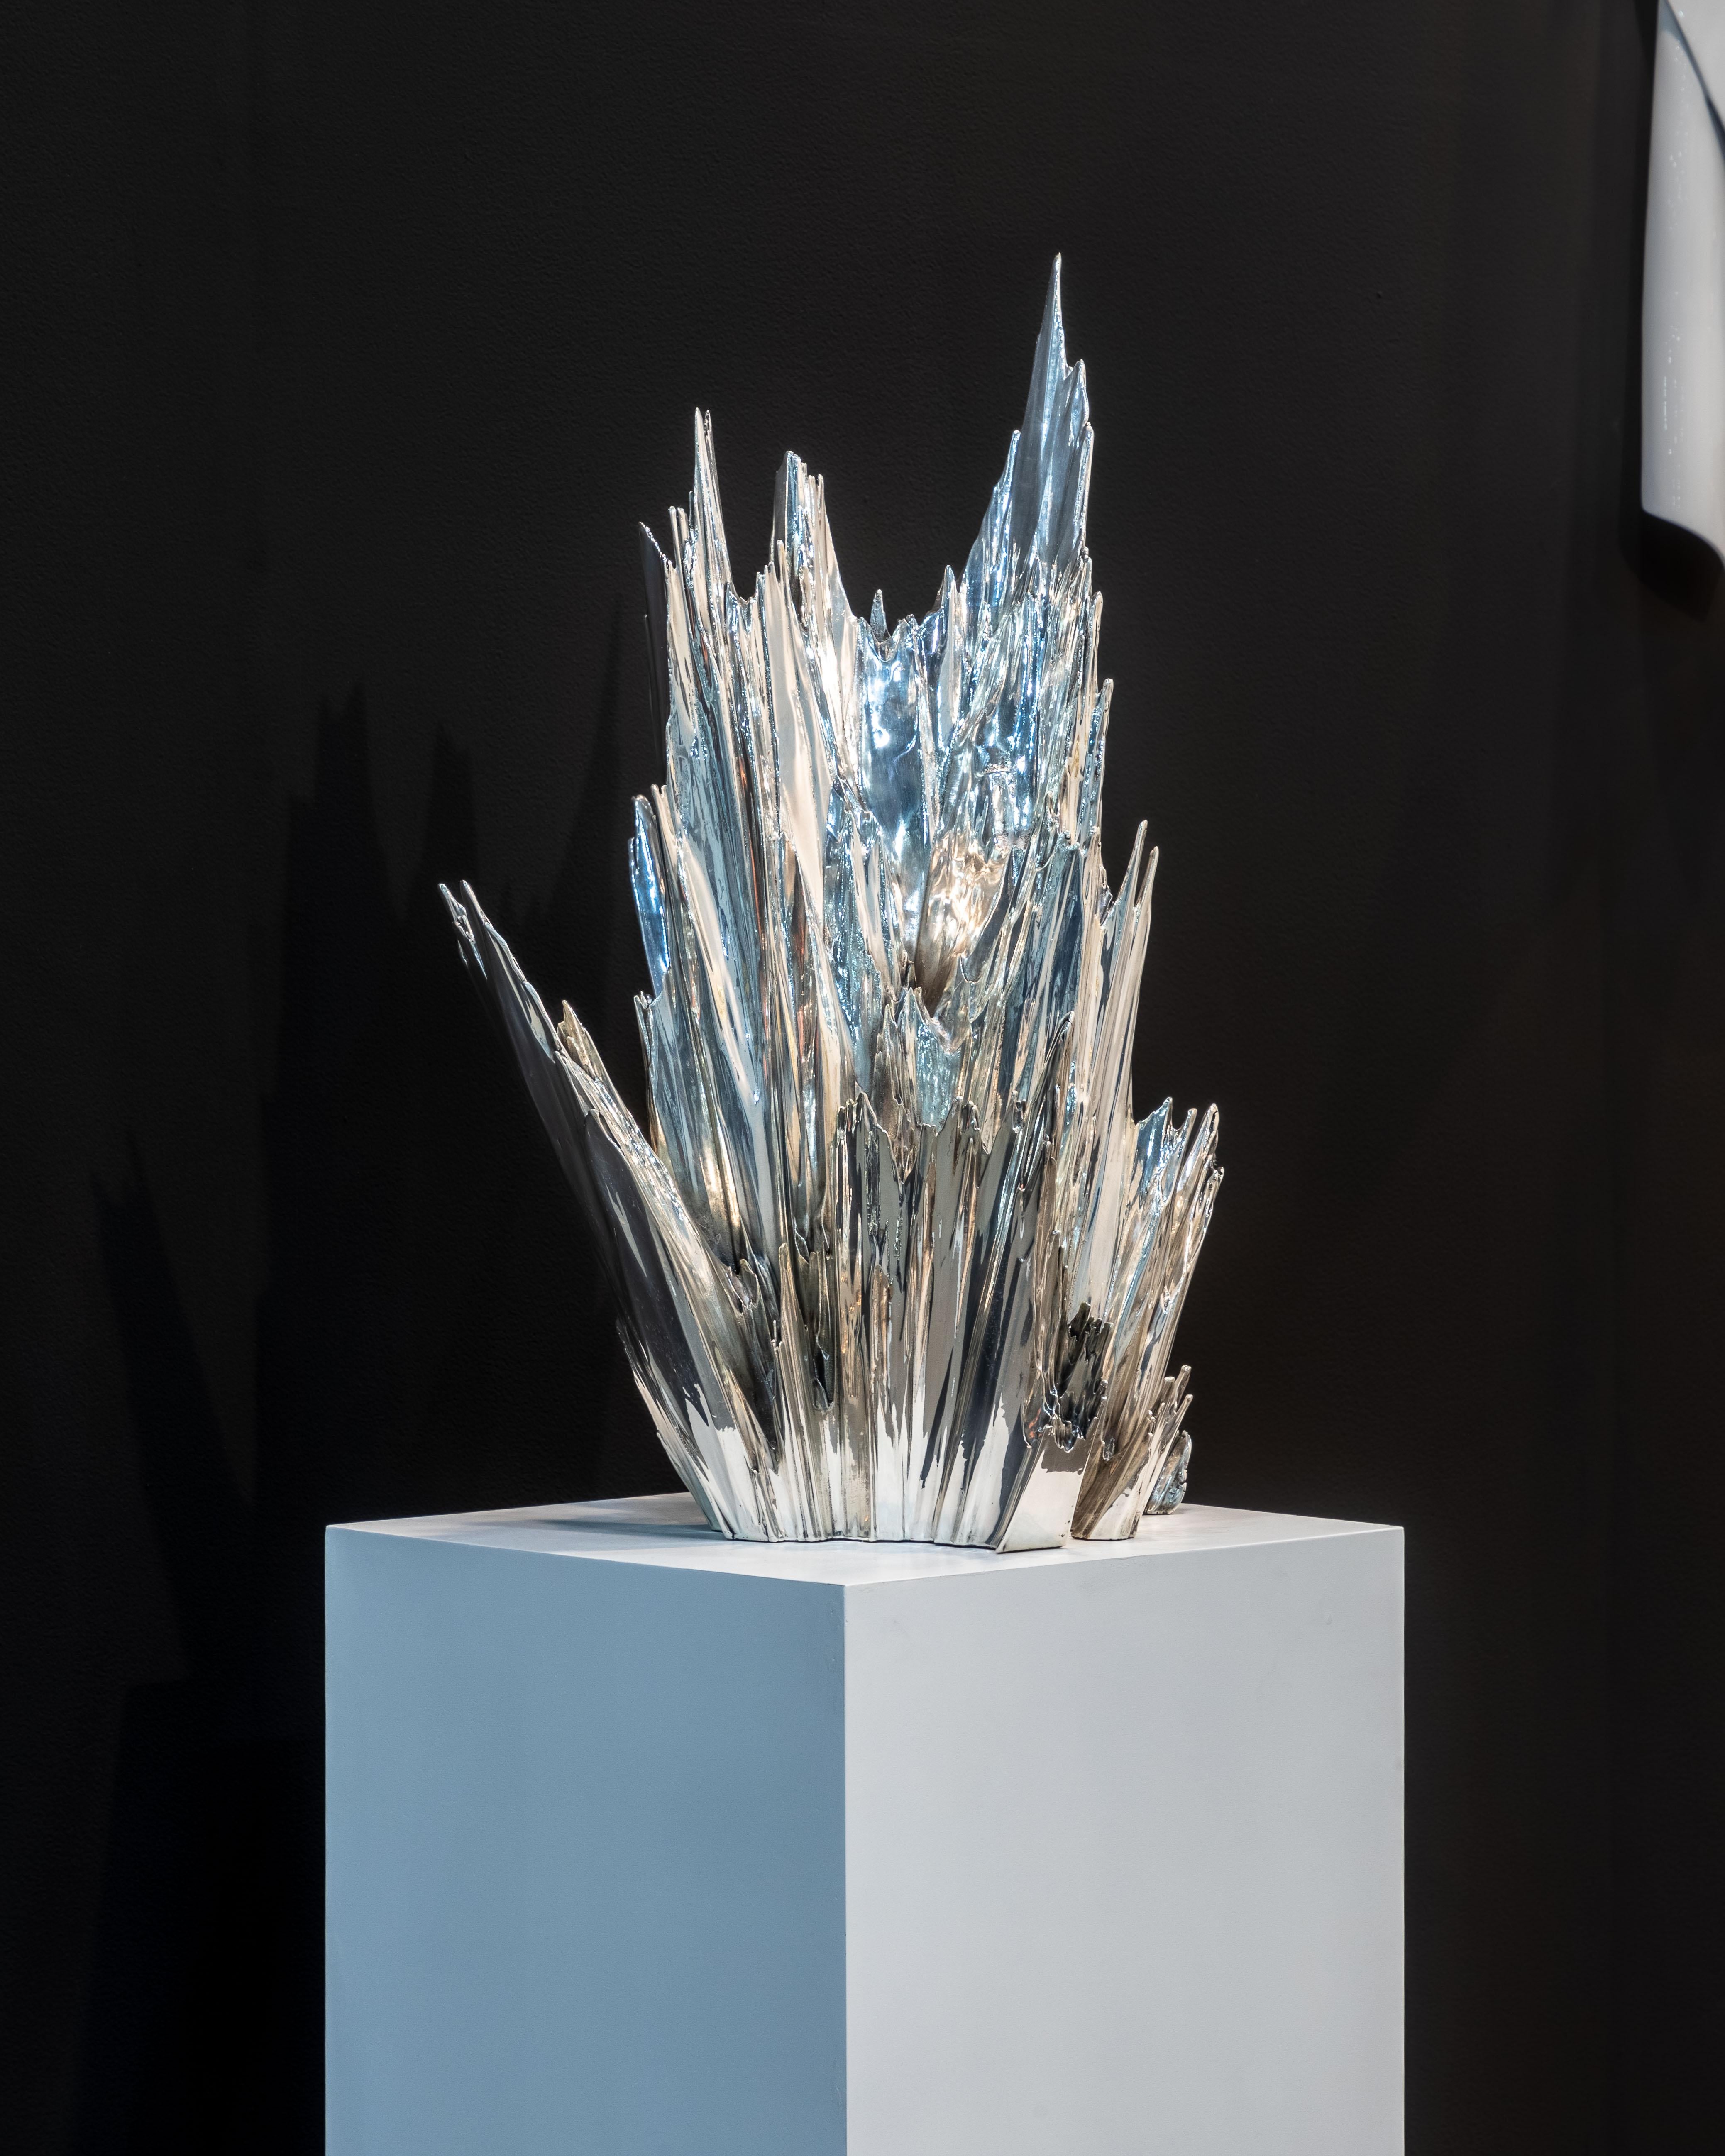 The Rock Sculpture from the Spectra Collection captures the untamed beauty of abstract geological forms. Conceived as if chiseled from the rocks of a surreal landscape, this piece is a celebration of sharp angles and rough textures that challenge